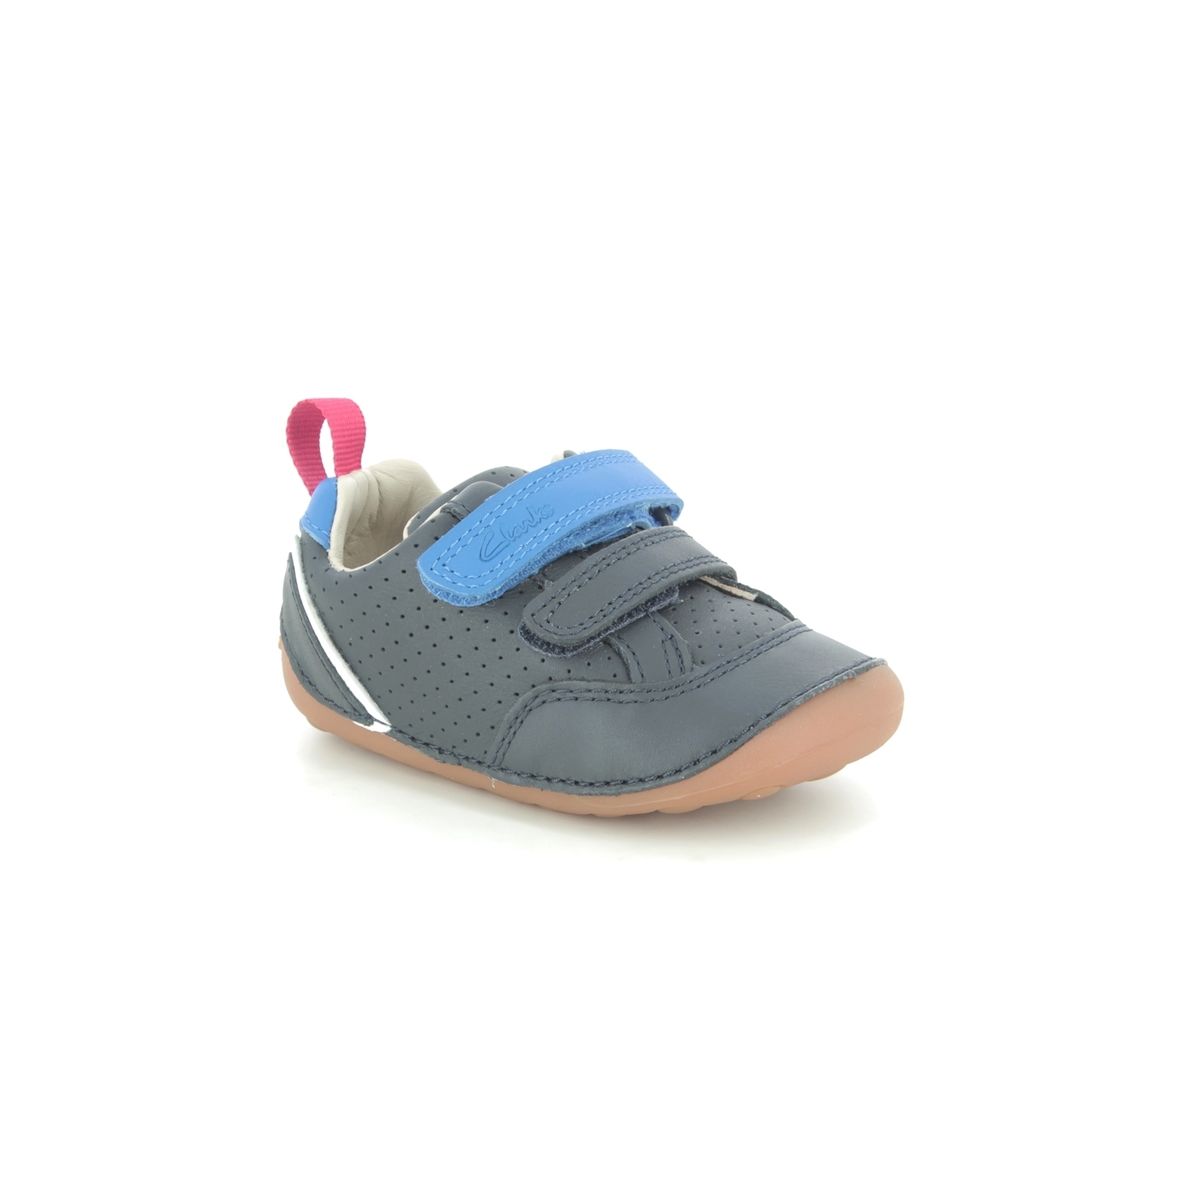 Clarks Tiny Sky T Navy Leather Kids Boys First And Toddler 576296F In Size 4 In Plain Navy Leather F Width Fitting Regular Fit For kids